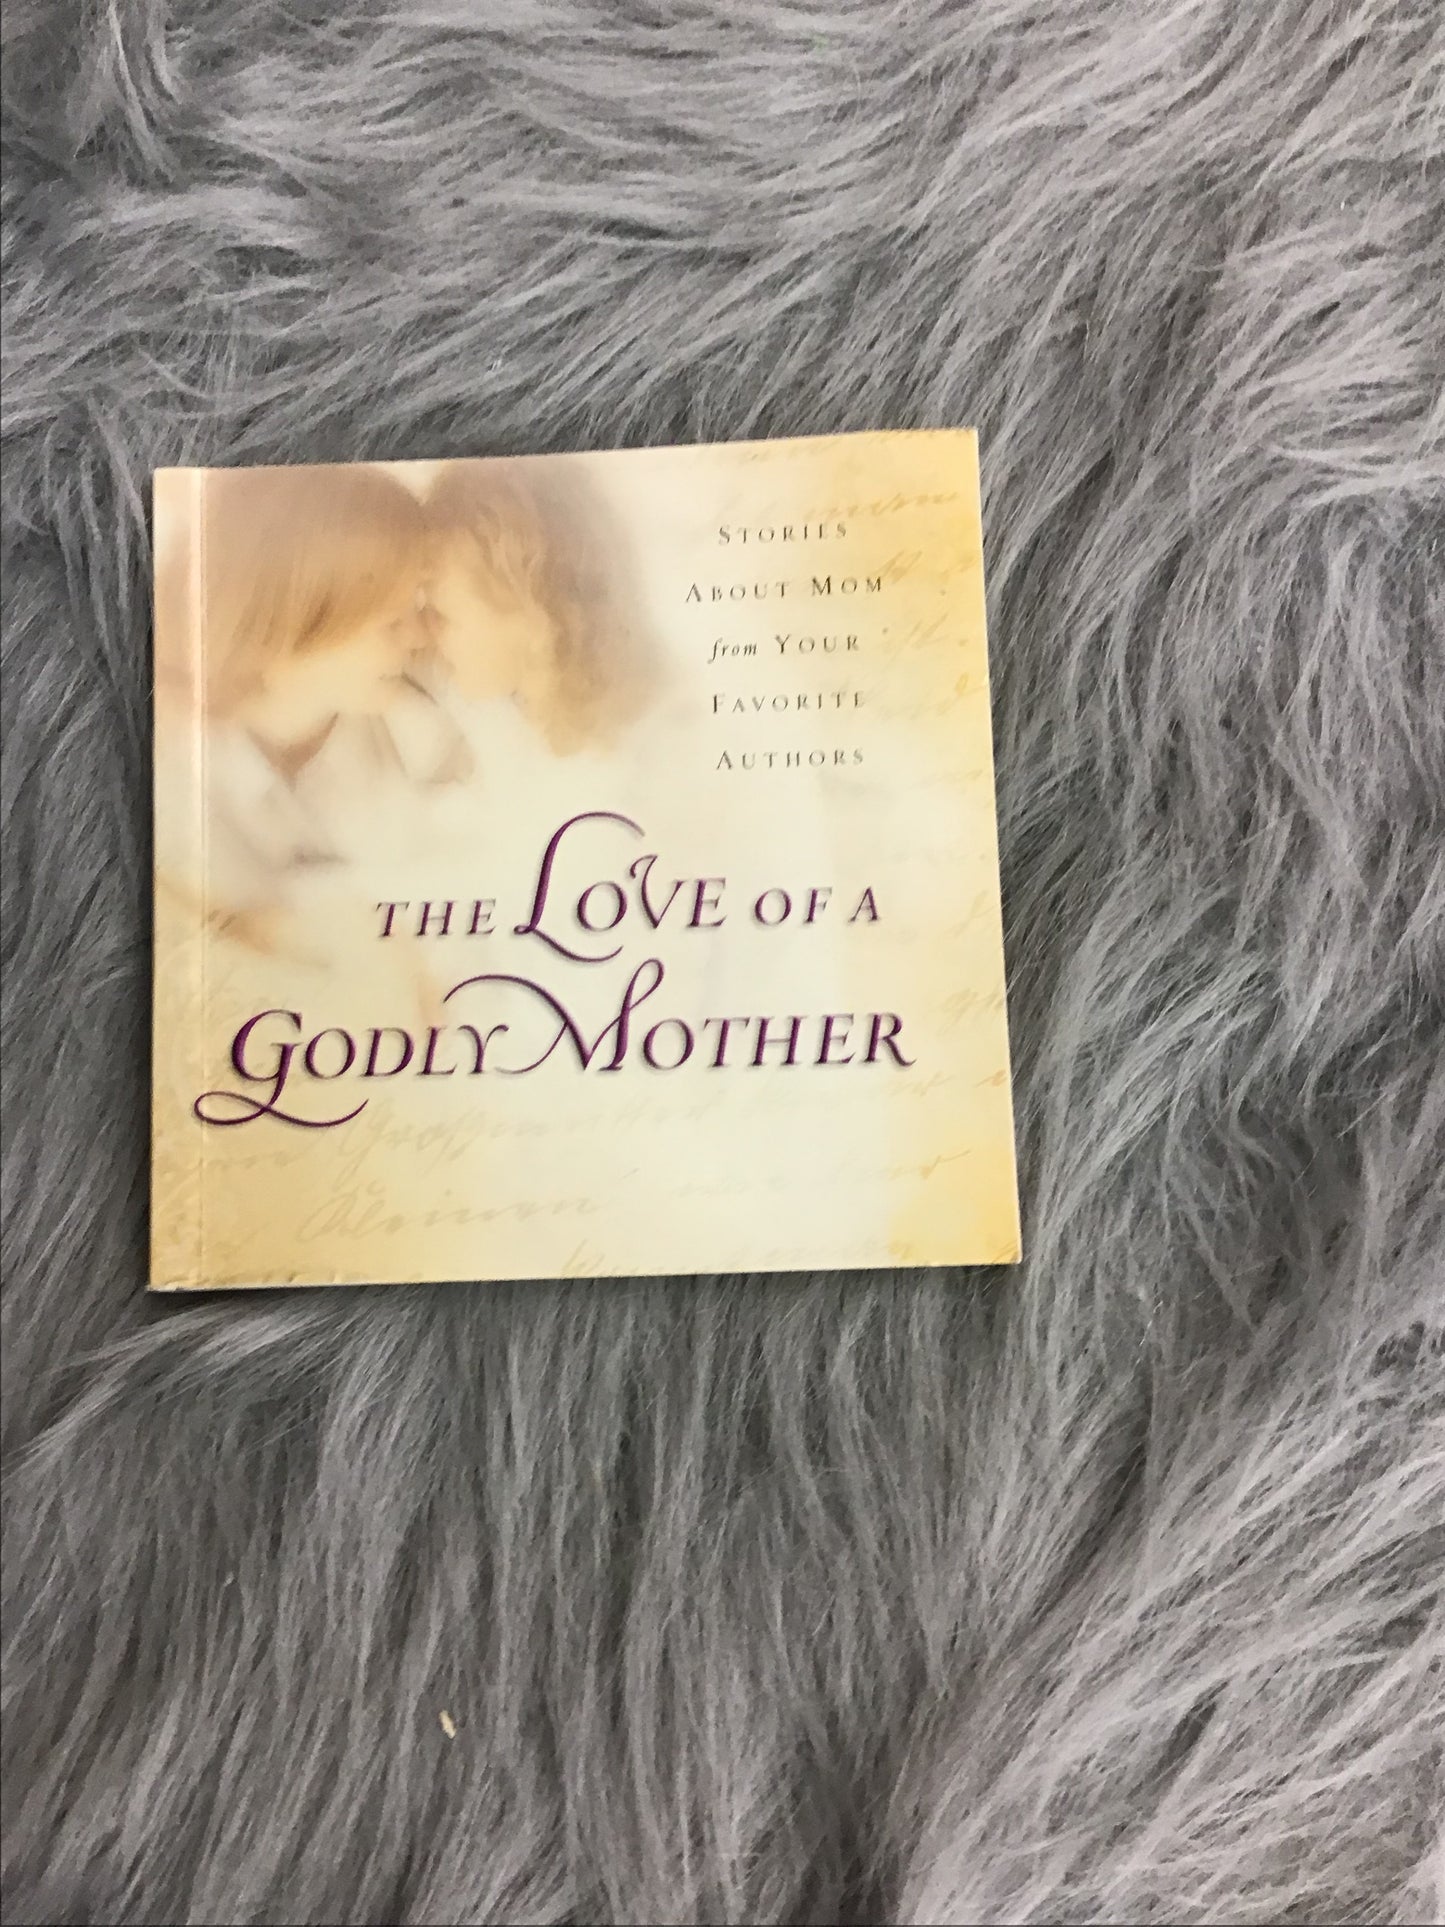 The love of a Godly mother